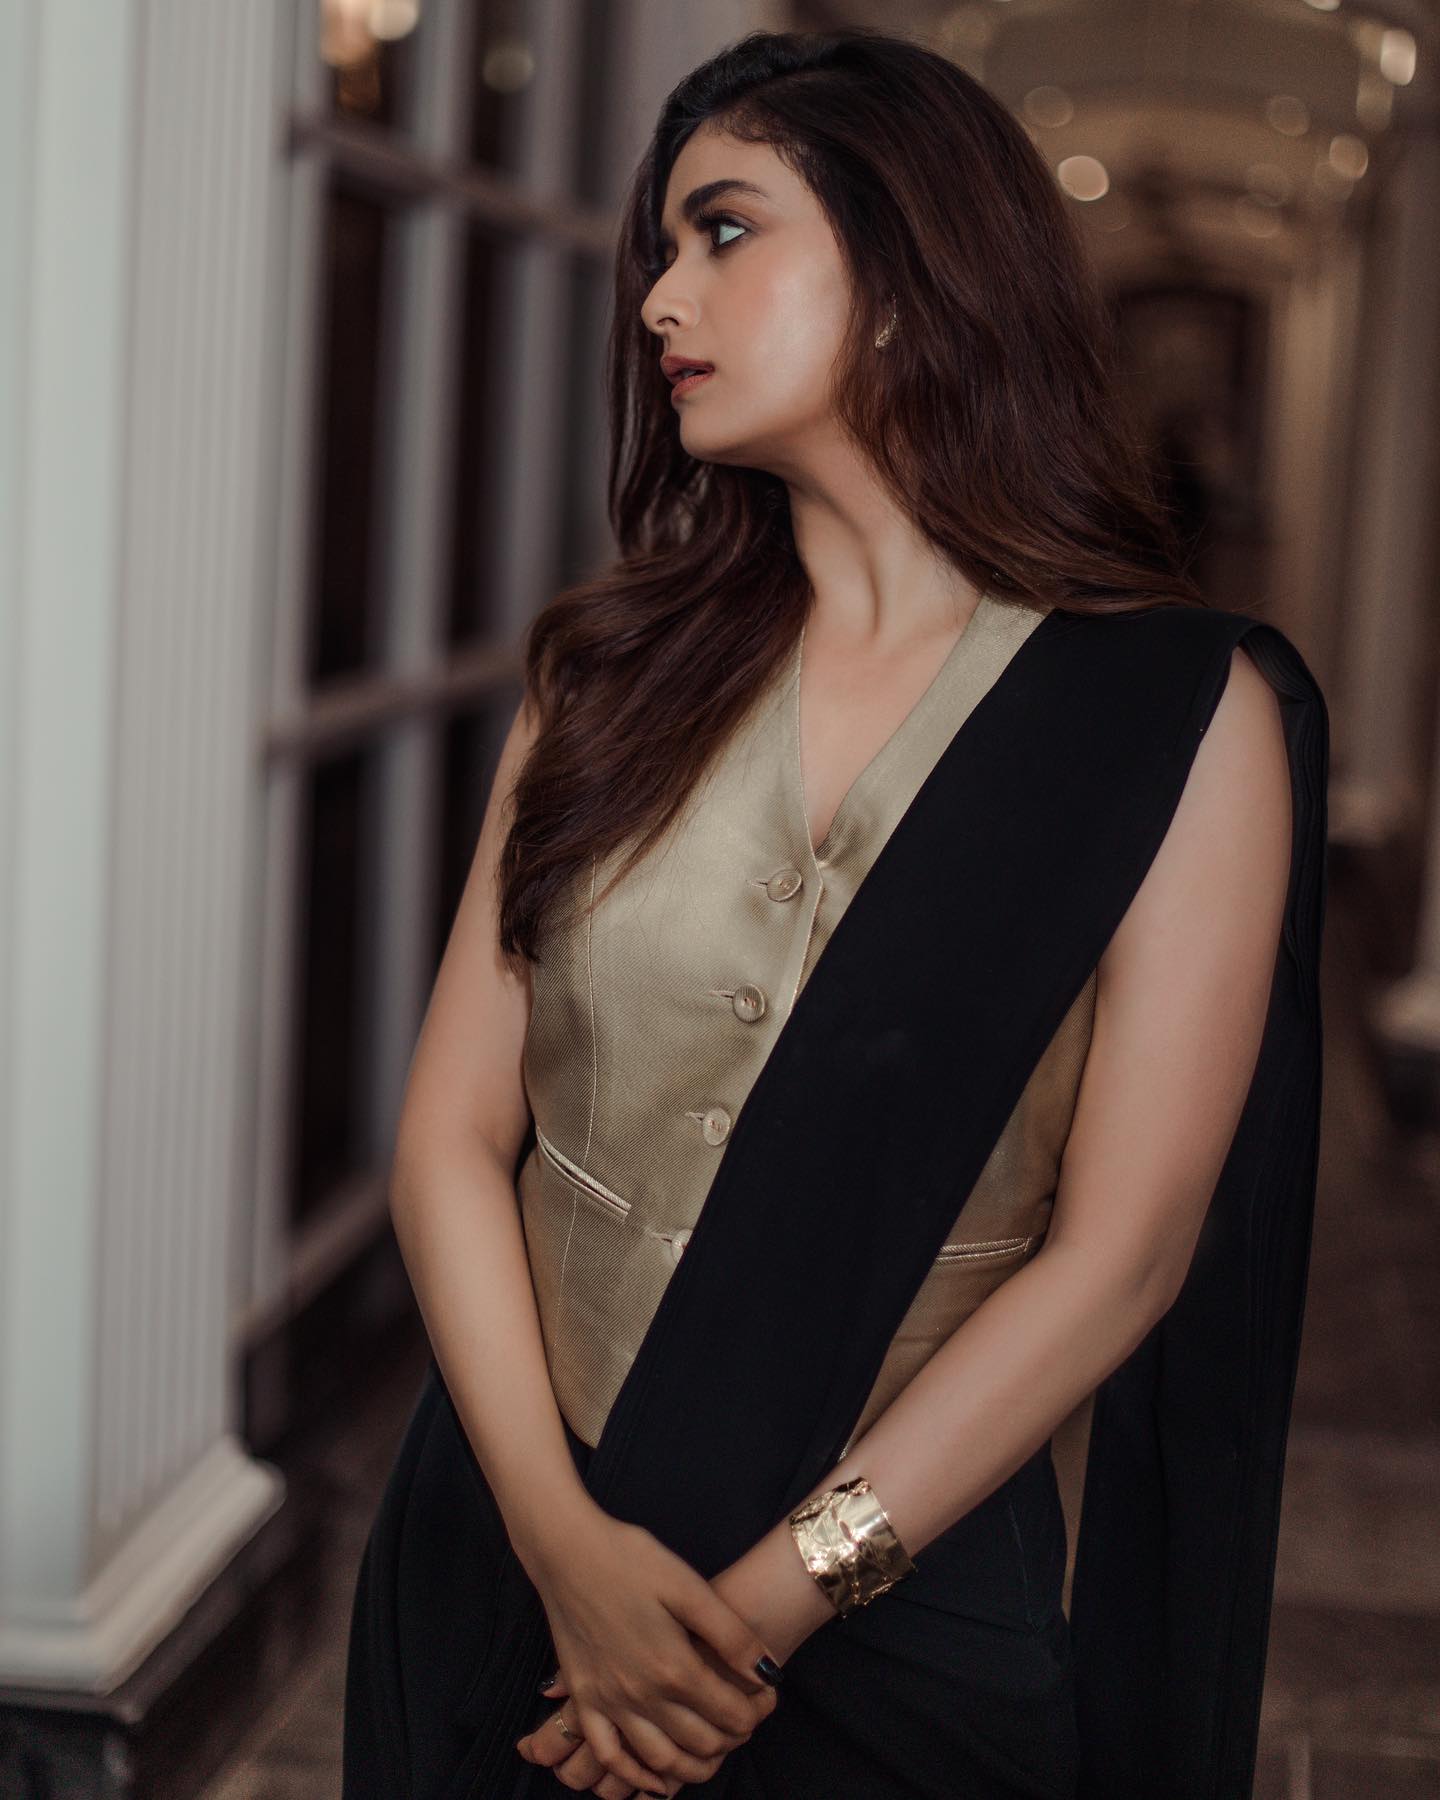 Keerthy Suresh brushes up her bossy babe style in black saree, take cues 832577